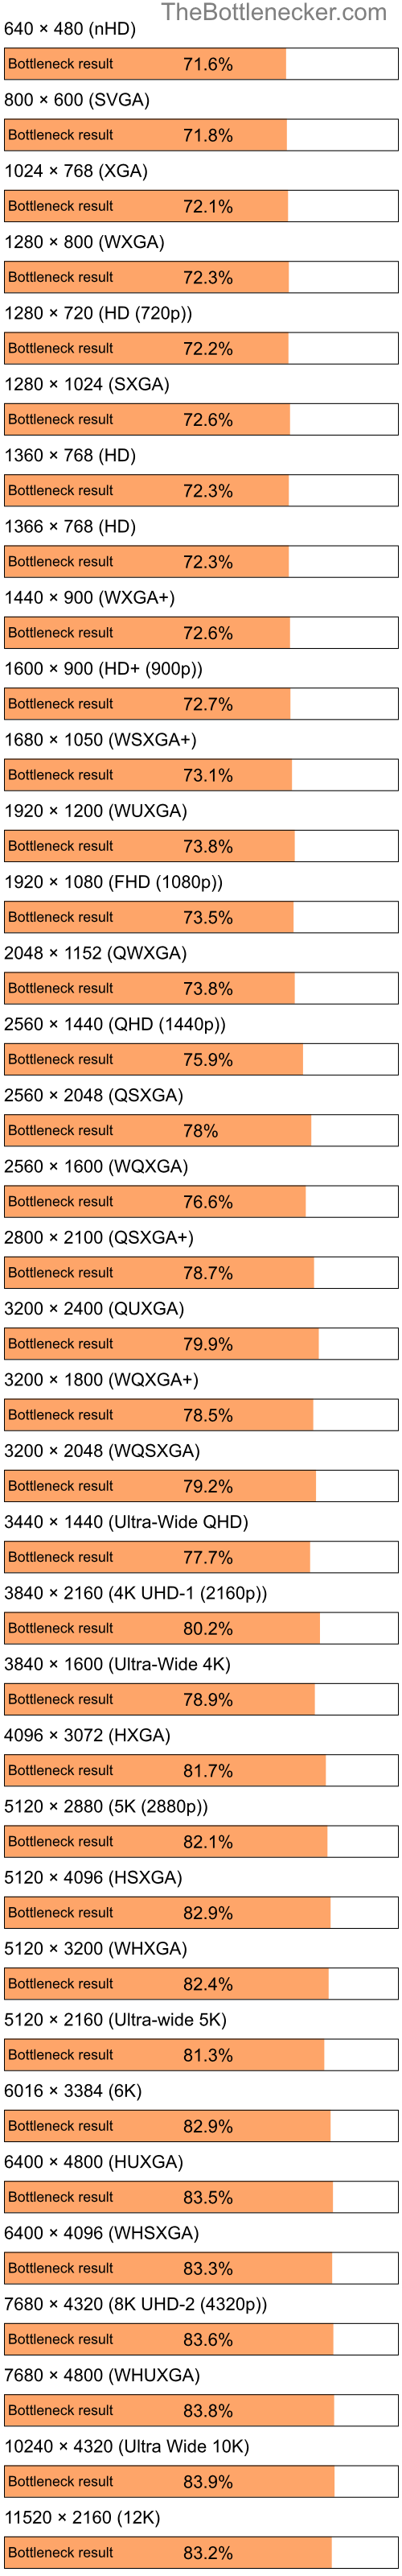 Bottleneck results by resolution for Intel Celeron M 420 and AMD Mobility Radeon HD 3450 in Graphic Card Intense Tasks